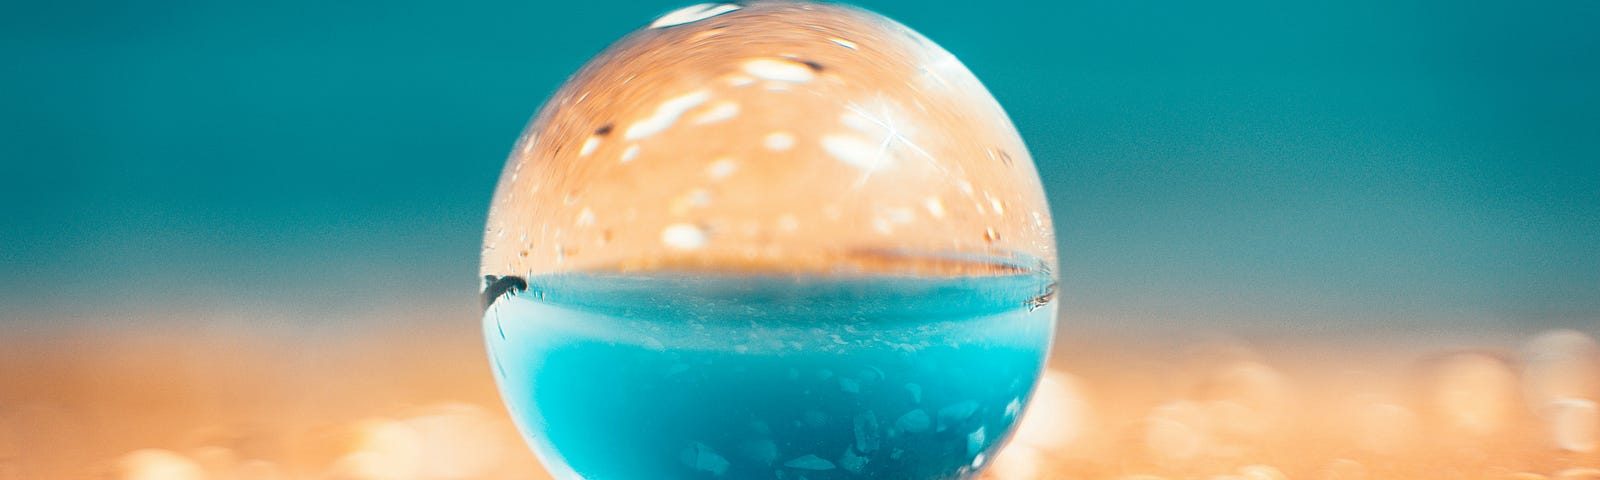 A transparent sphere reflecting the sand and ocean behind it